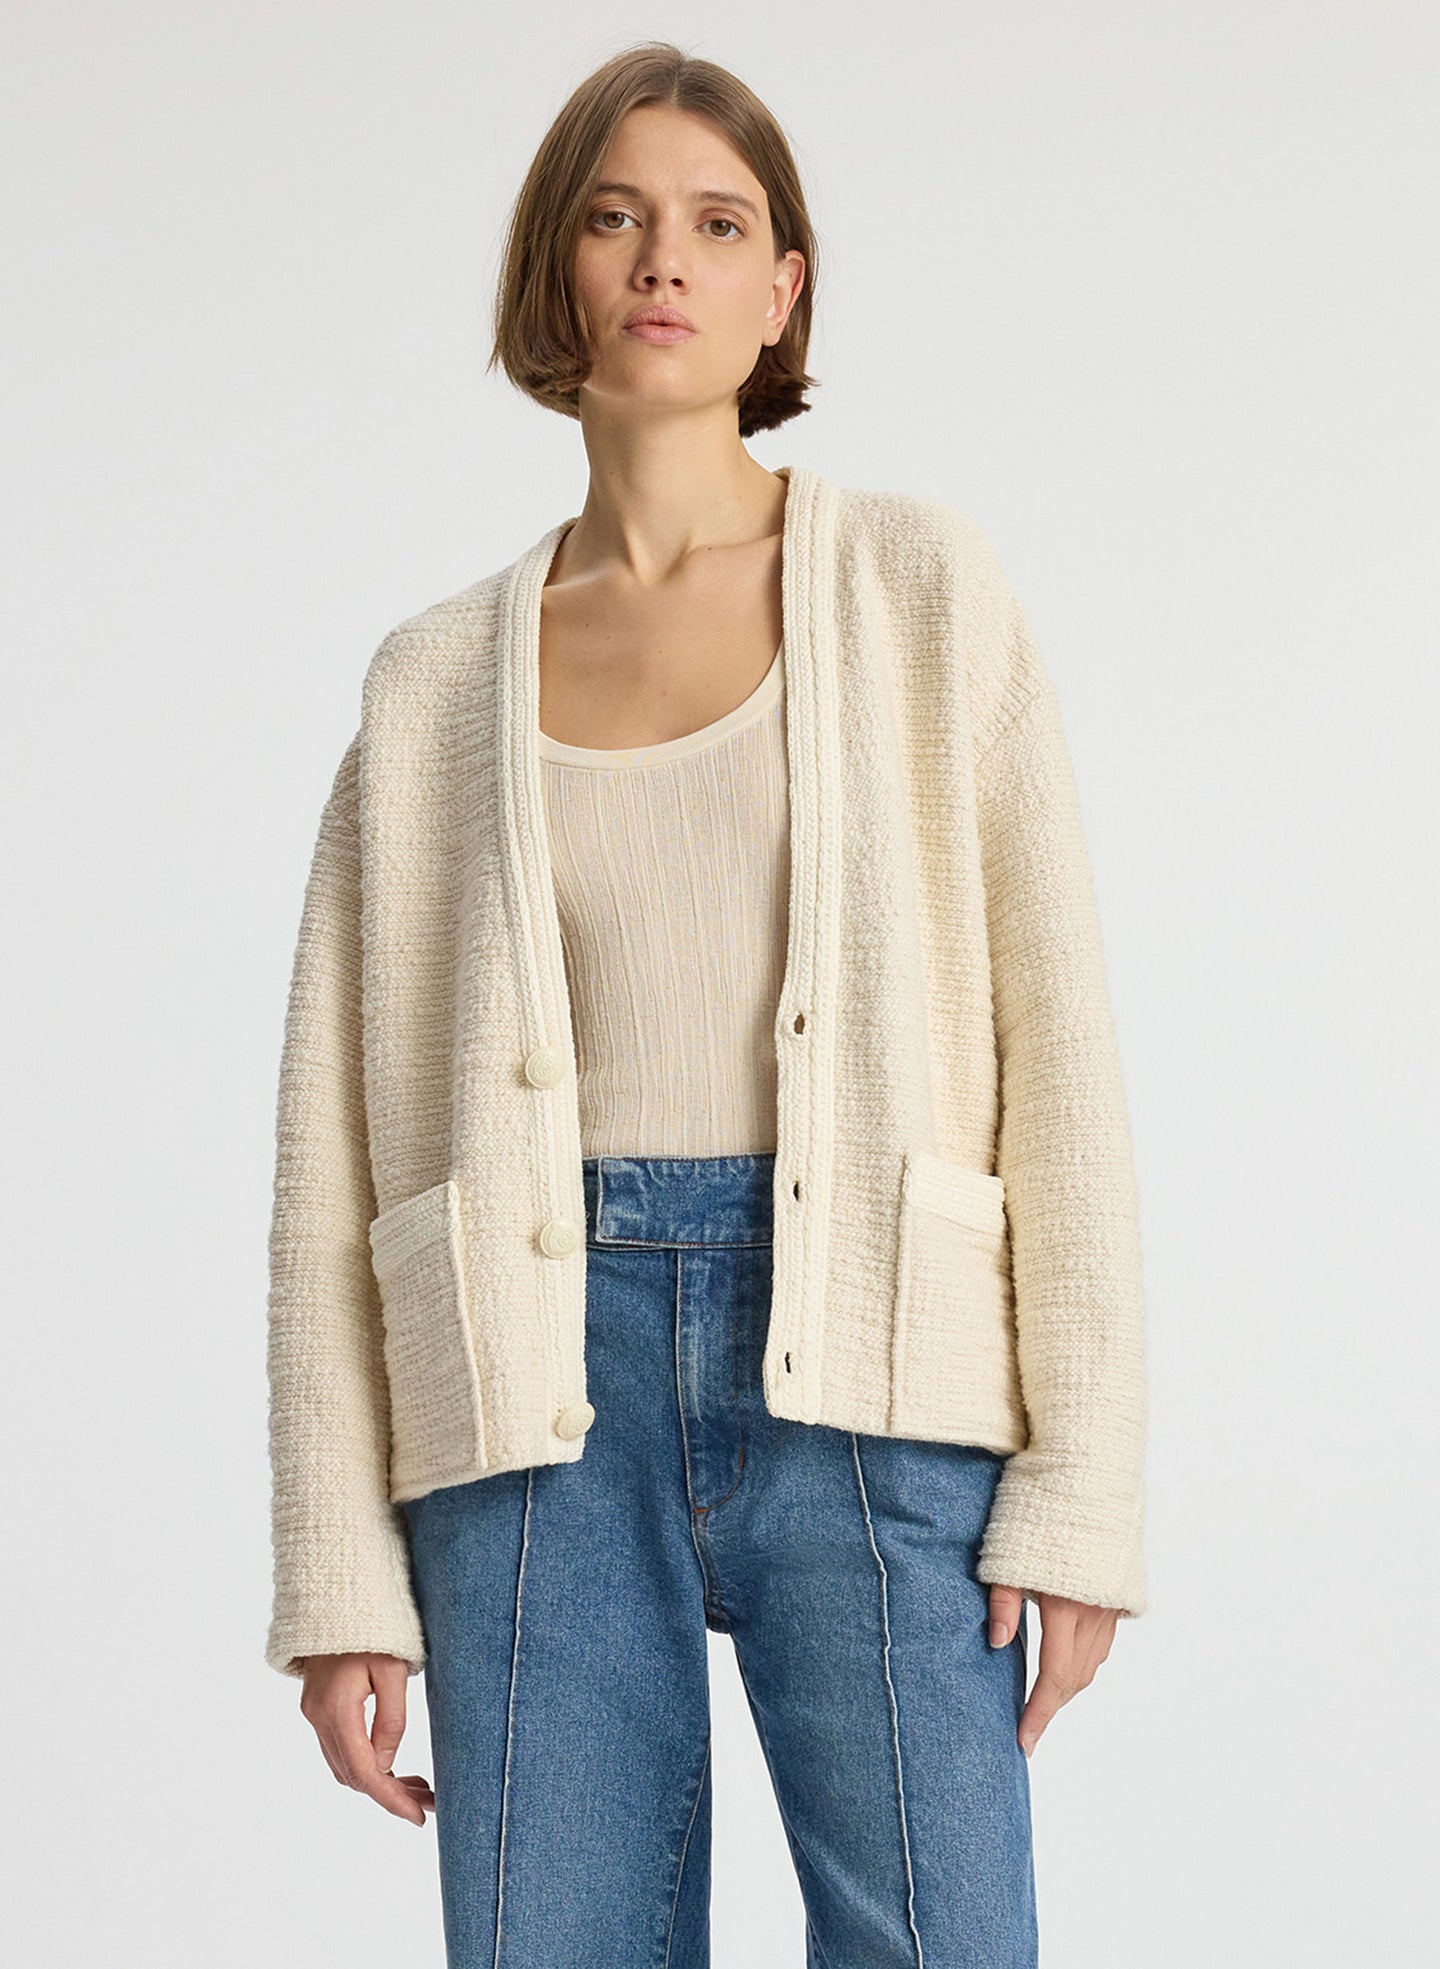 front view of woman wearing cream boucle jacket, cream tank top and medium blue denim jeans